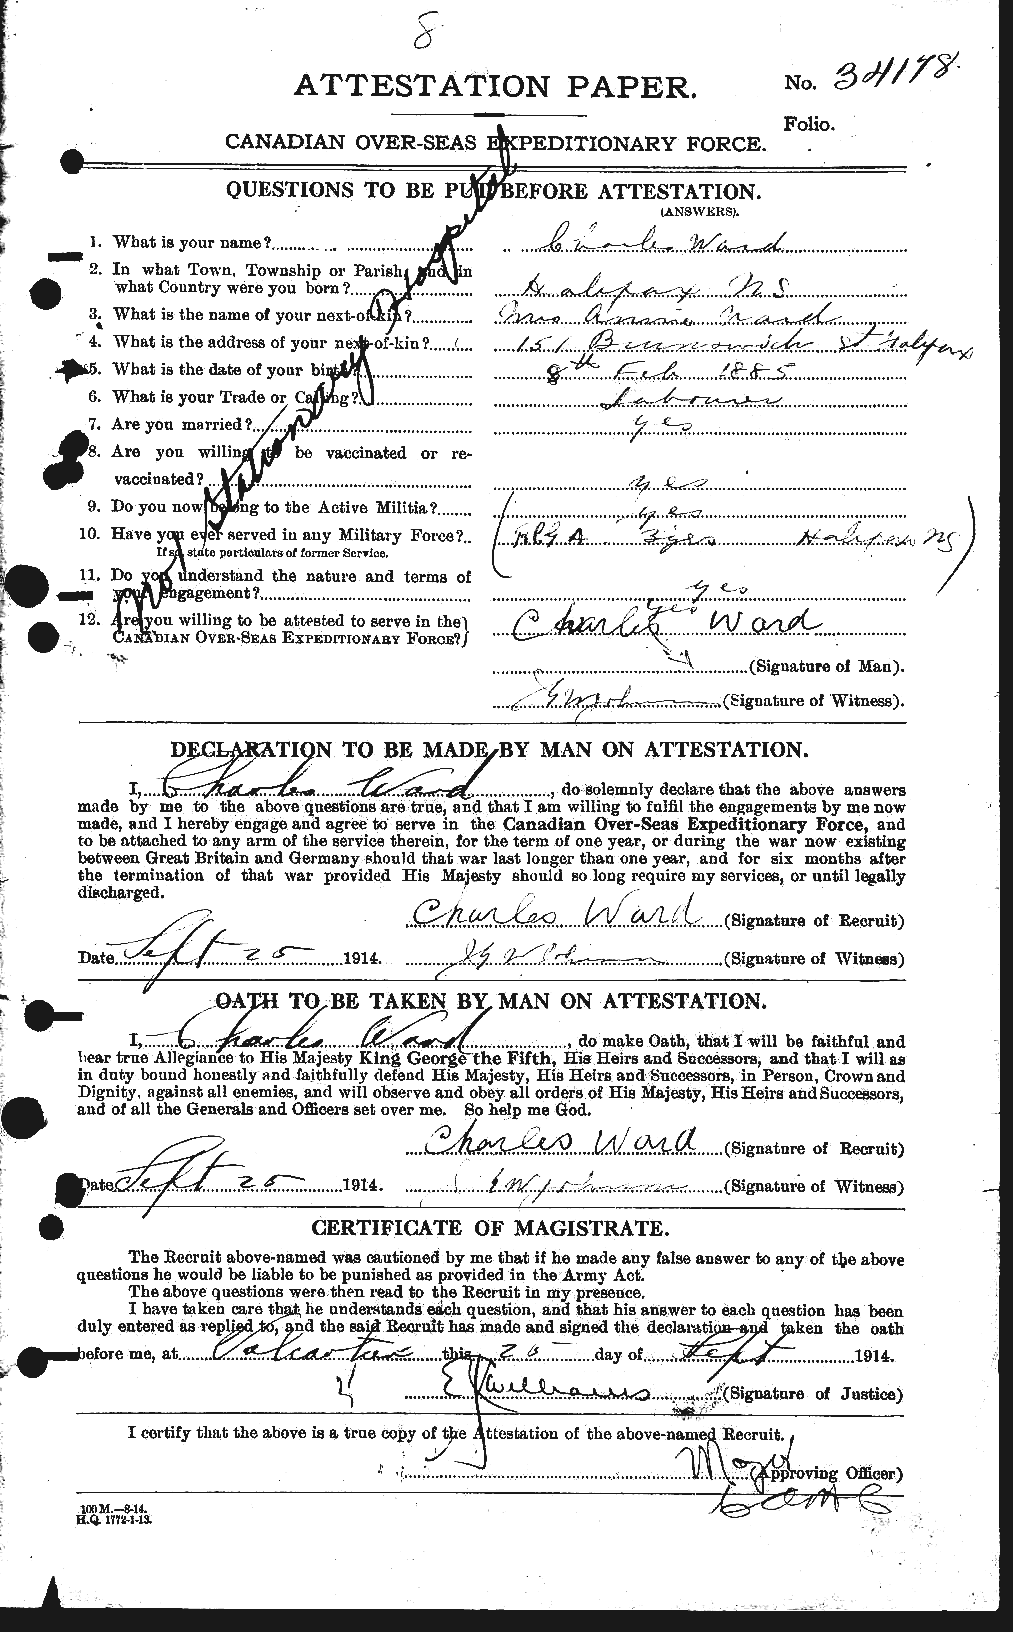 Personnel Records of the First World War - CEF 657568a